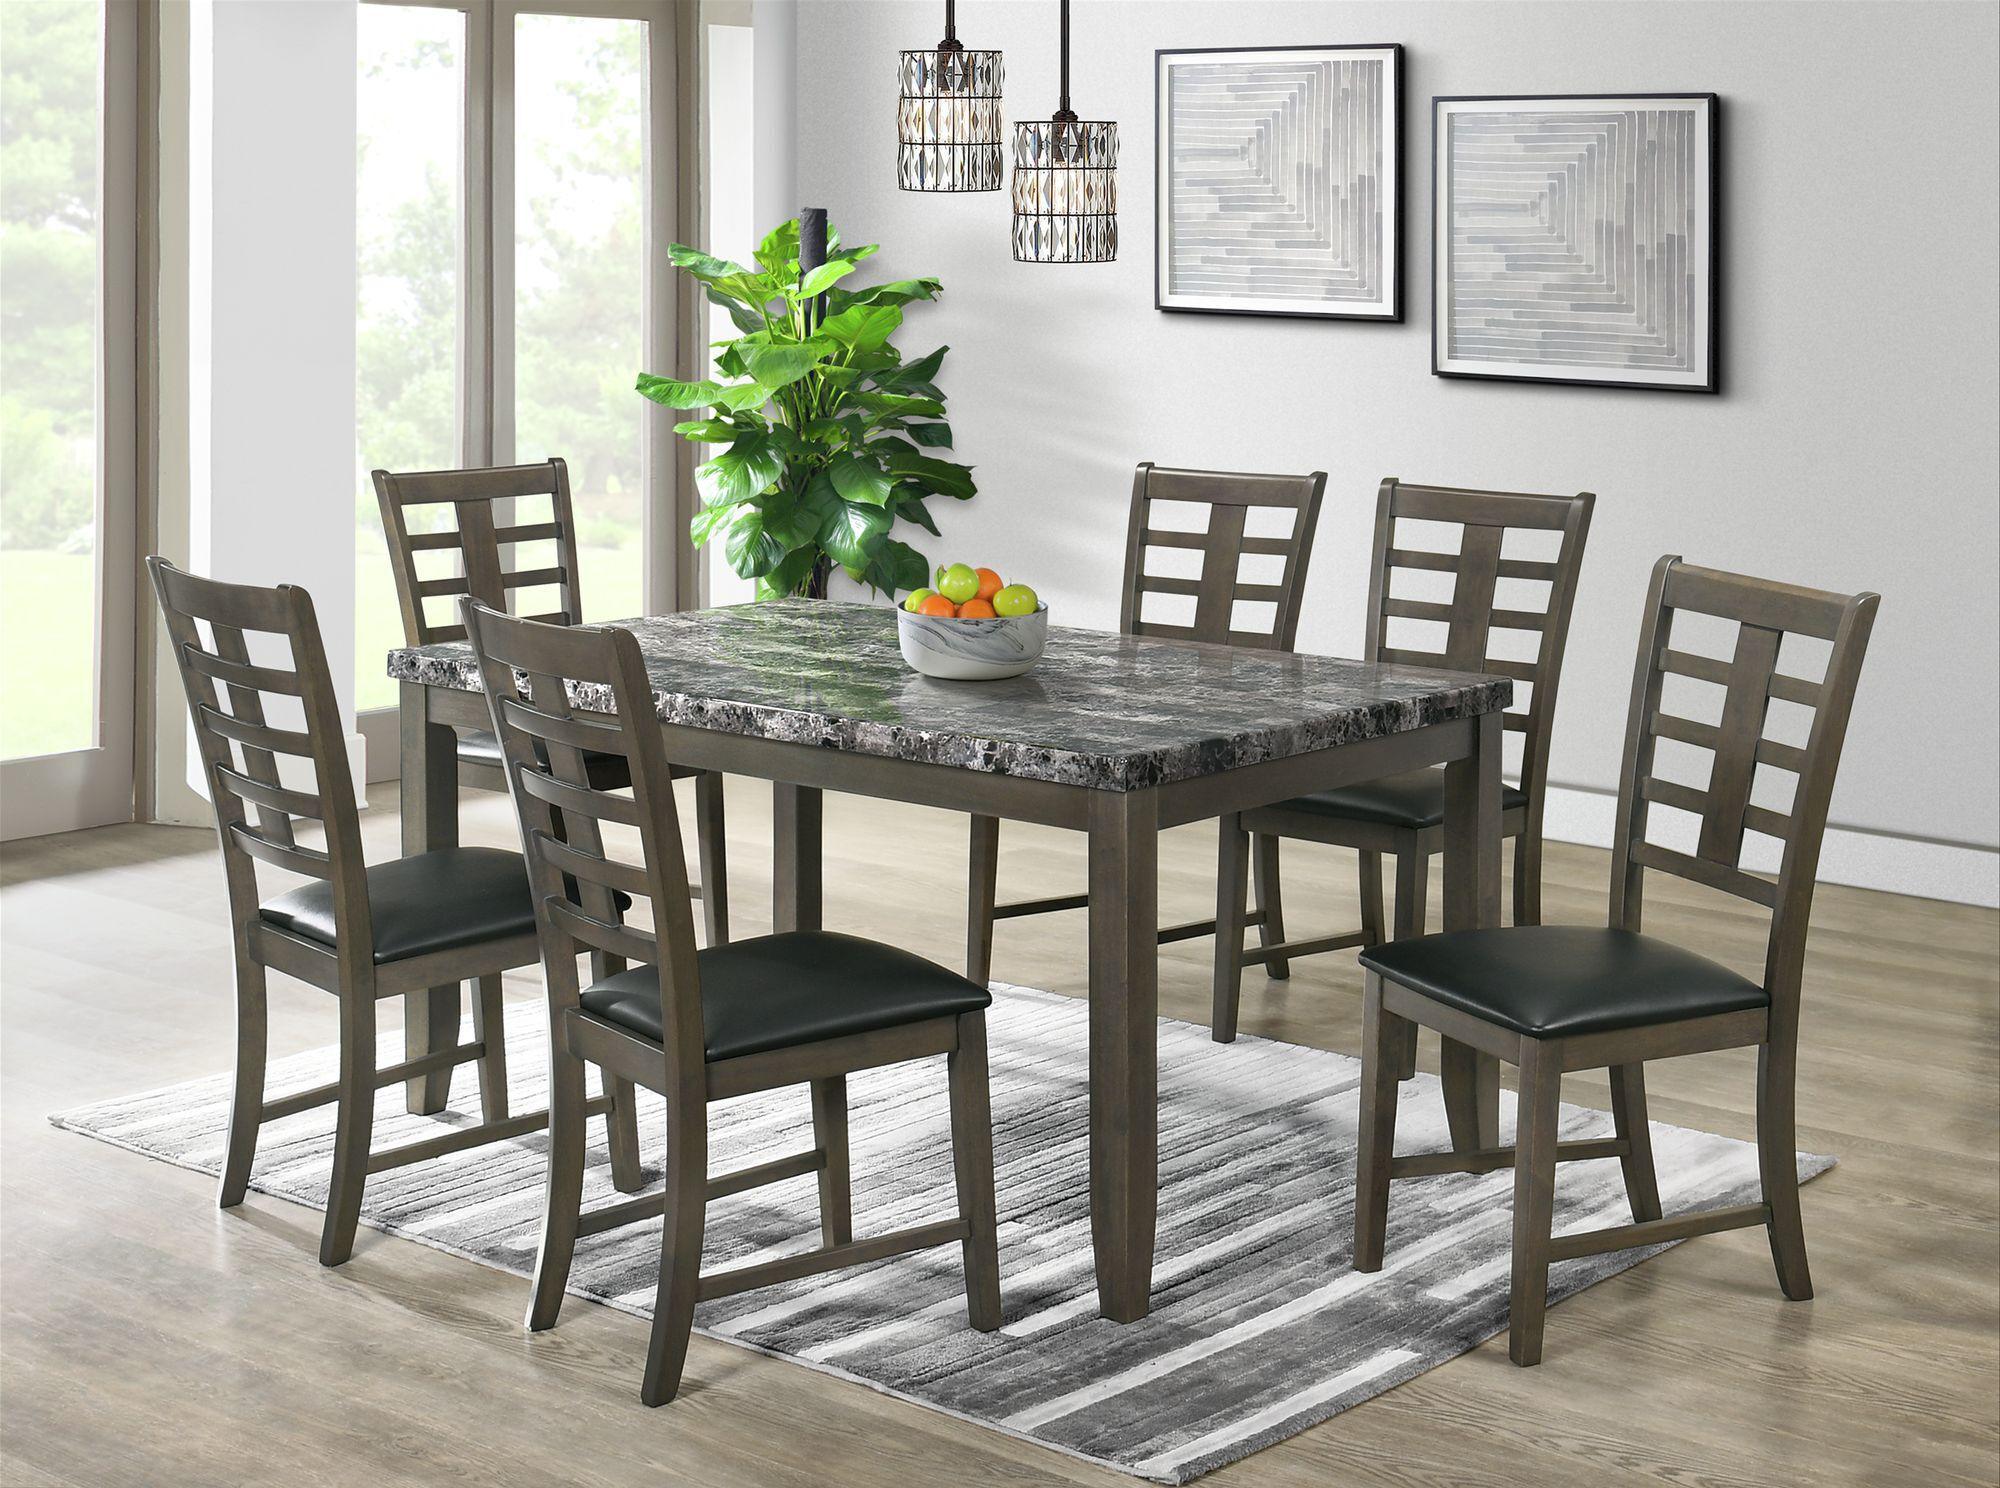 Elements Dining Sets - Nixon 7PC Standard Height Dining Set in Gray